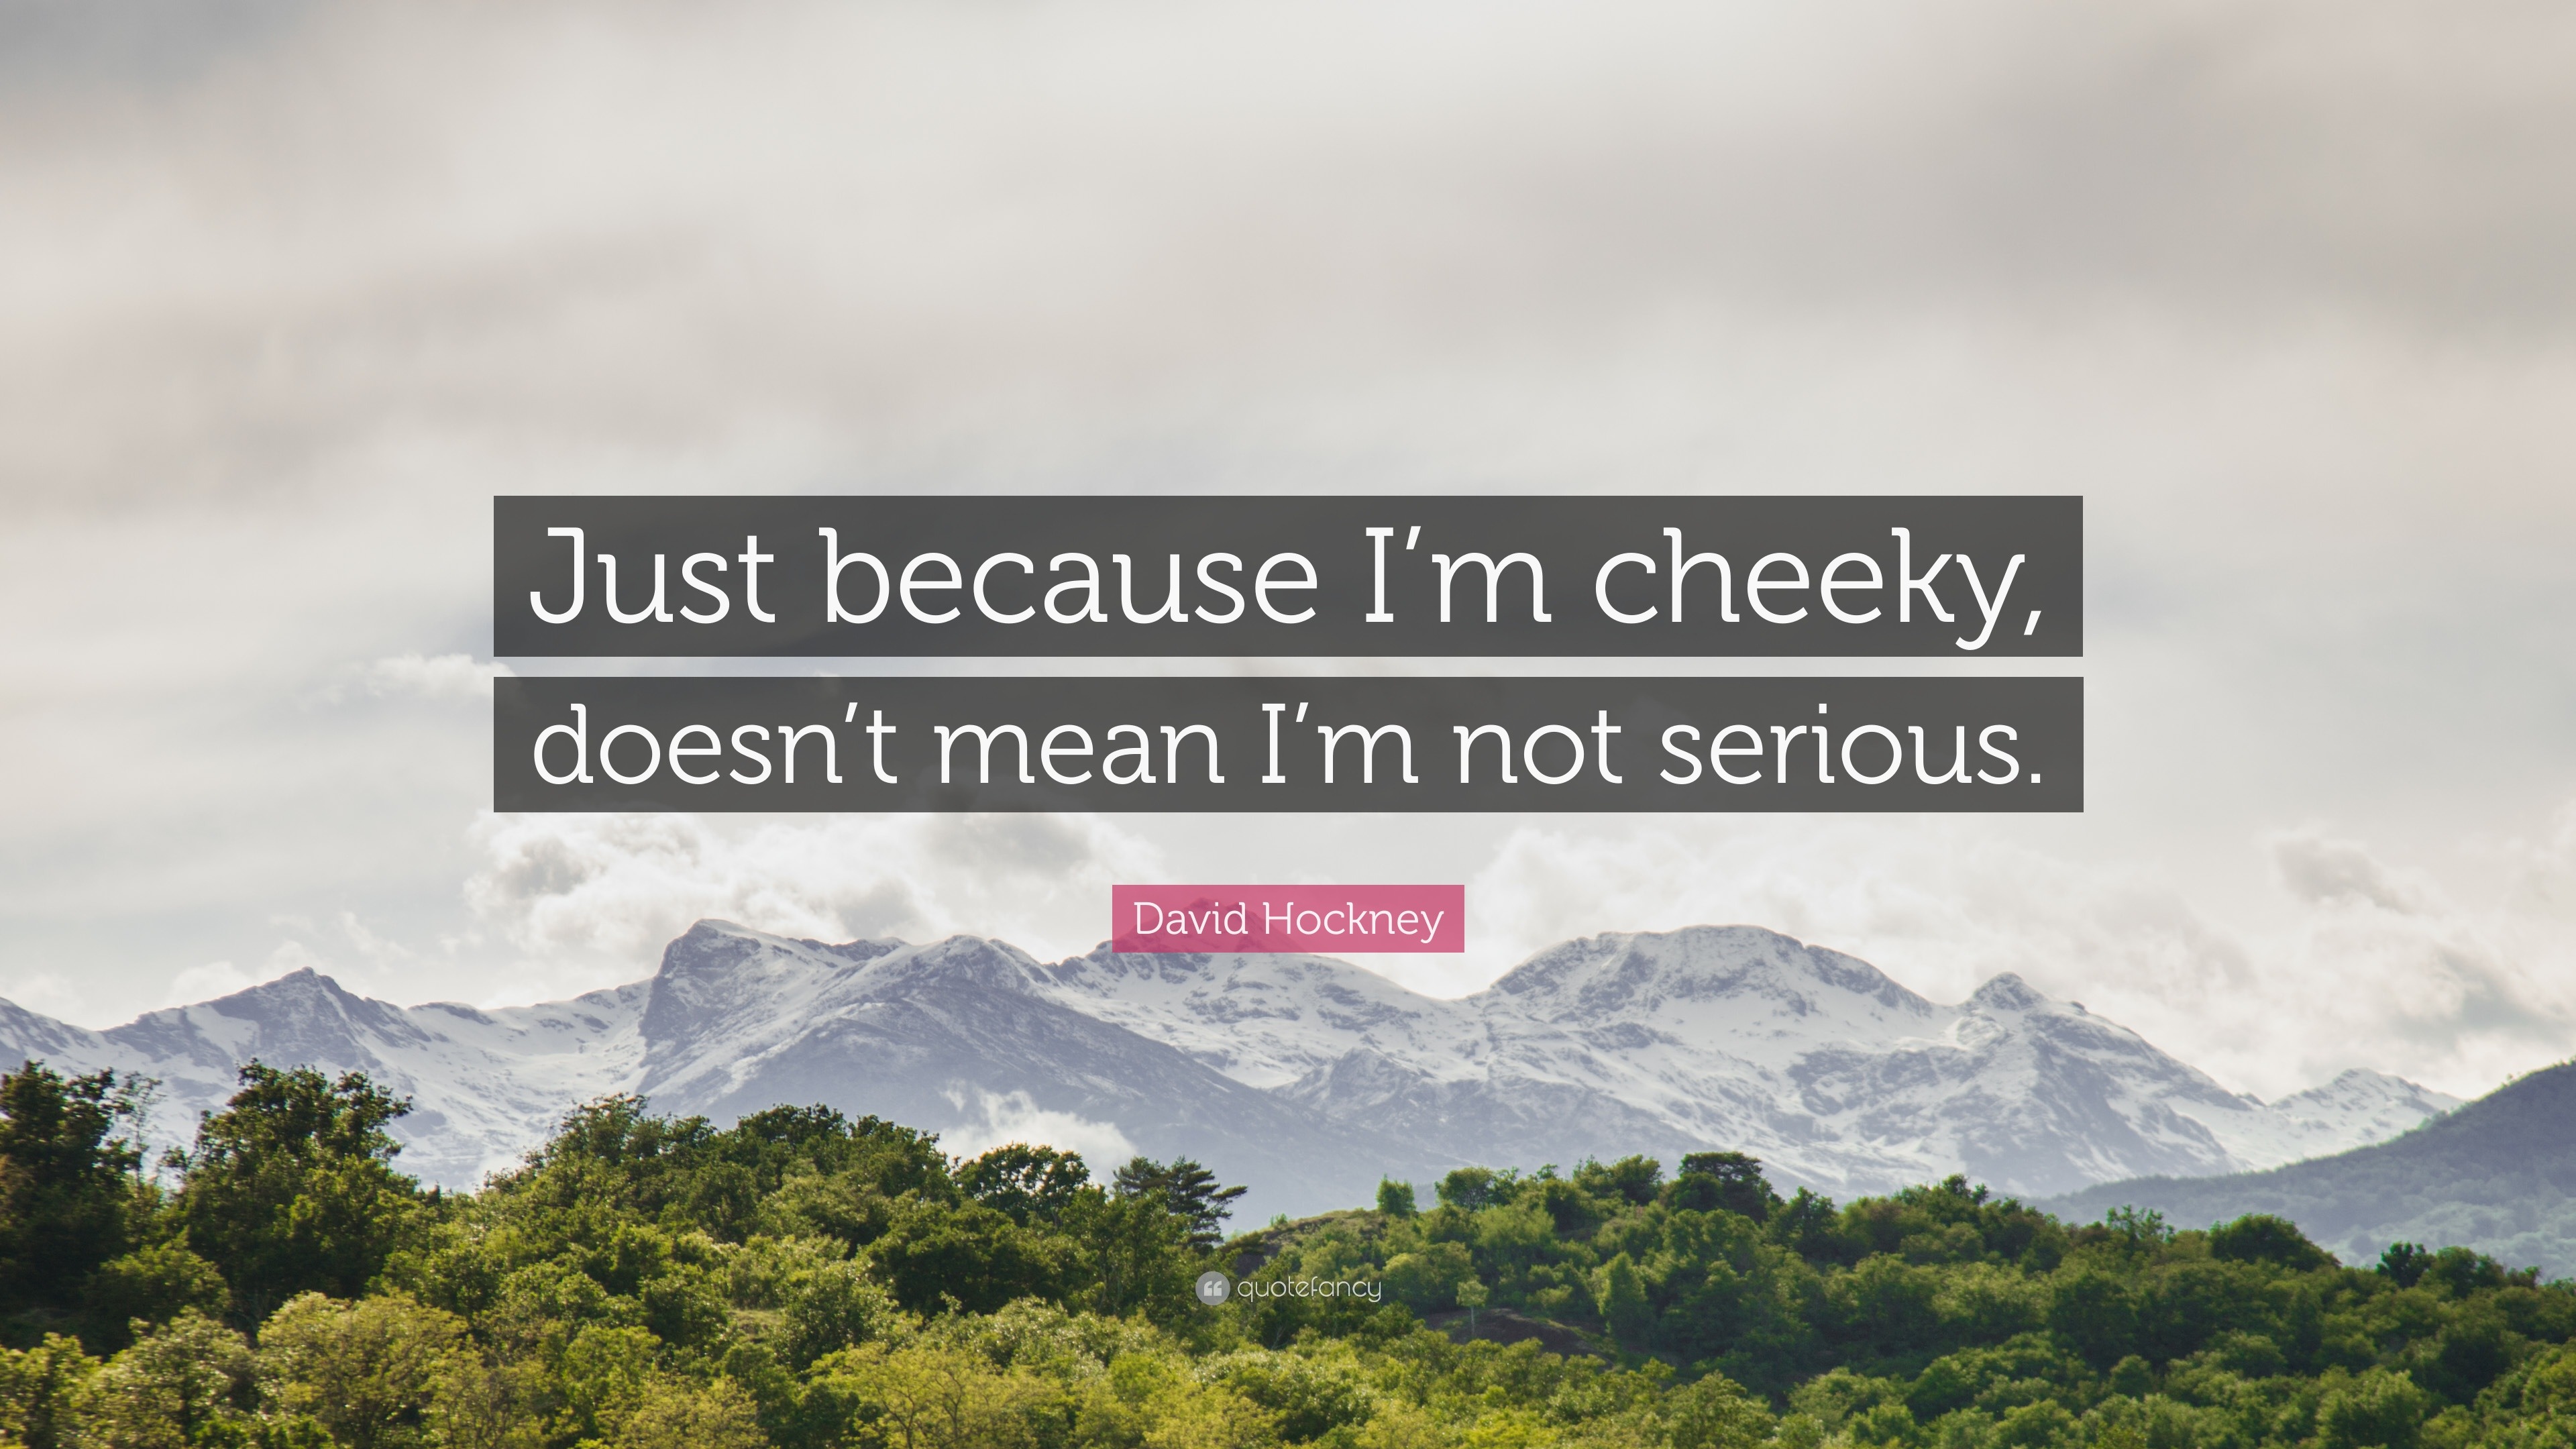 David Hockney Quote: “Just because I'm cheeky, doesn't mean I'm